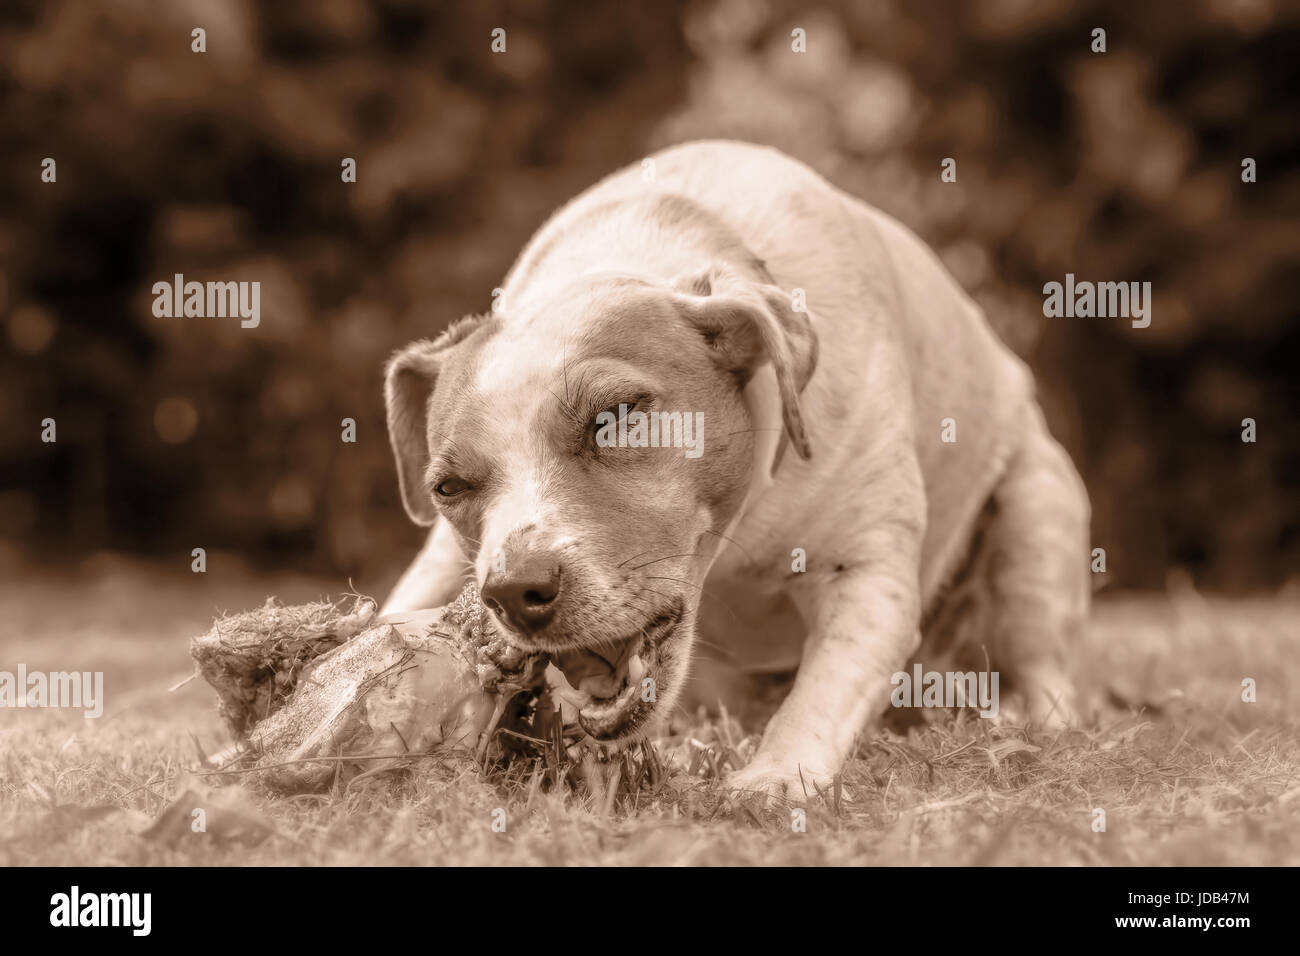 Close Up Jack Russell Terrier Dog Chewing An Oversize Cow Bone Stock Photo